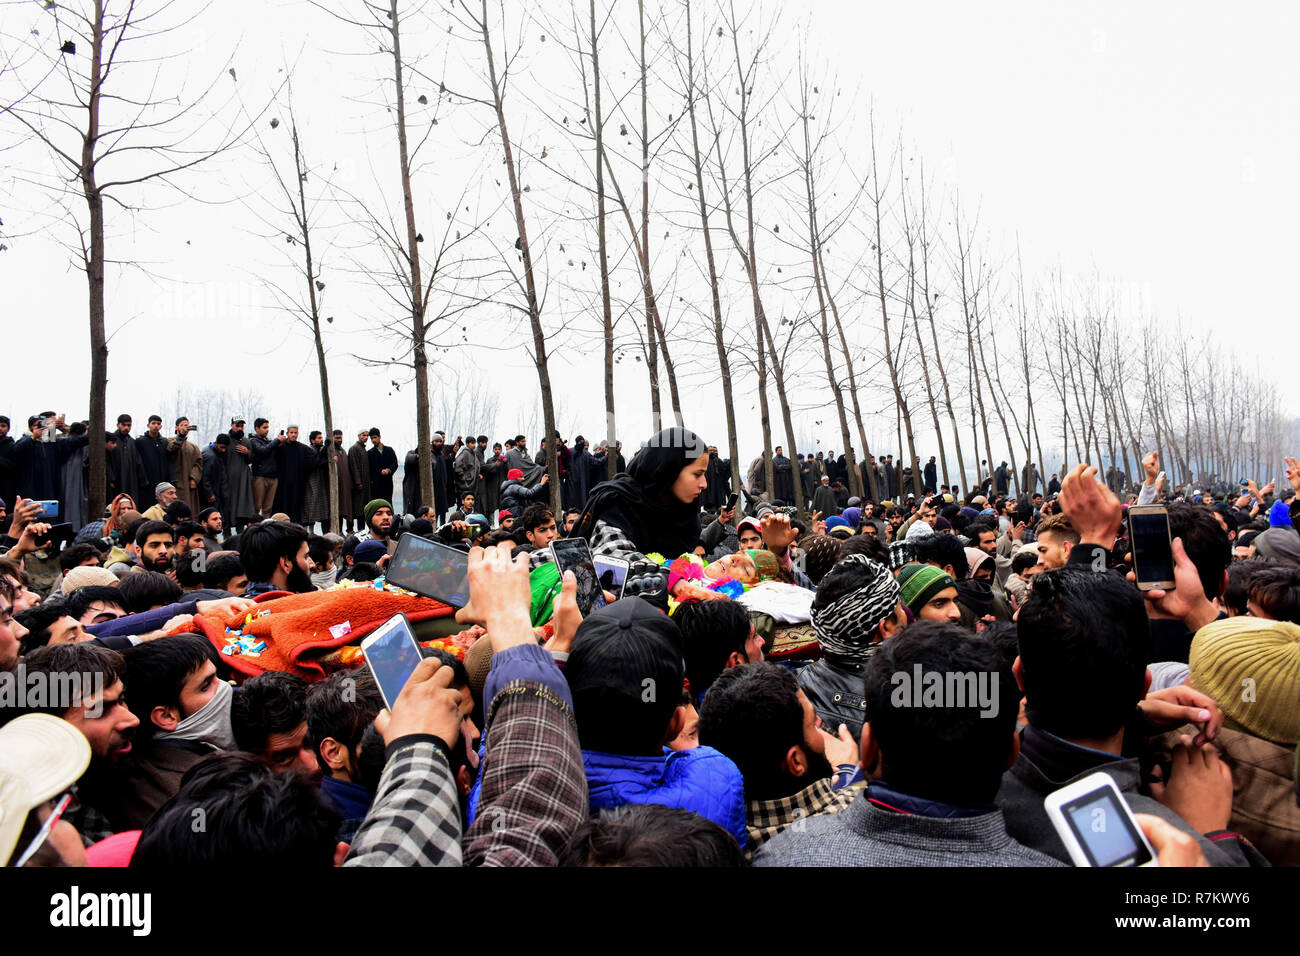 December 10, 2018 - Thousands of mourners carry the body of alleged rebels Mudasir Parray, 14, and Mudasir Parray, 17, during their funeral procession in the Hajin Village of the Bandipura district in Indian Administered Kashmir on 10 December 2018. Mudasir Parray and Saqib Sheikh were killed together with a third militant in a 18-hour-long gun battle with Indian Forces in the Mujgund area of Srinagar on 09 December. According to the police, Parray is the youngest fighter killed in the decades-long insurgency in Indian administered Kashmir (Credit Image: © Muzamil Mattoo/IMAGESLIVE via ZUMA W Stock Photo